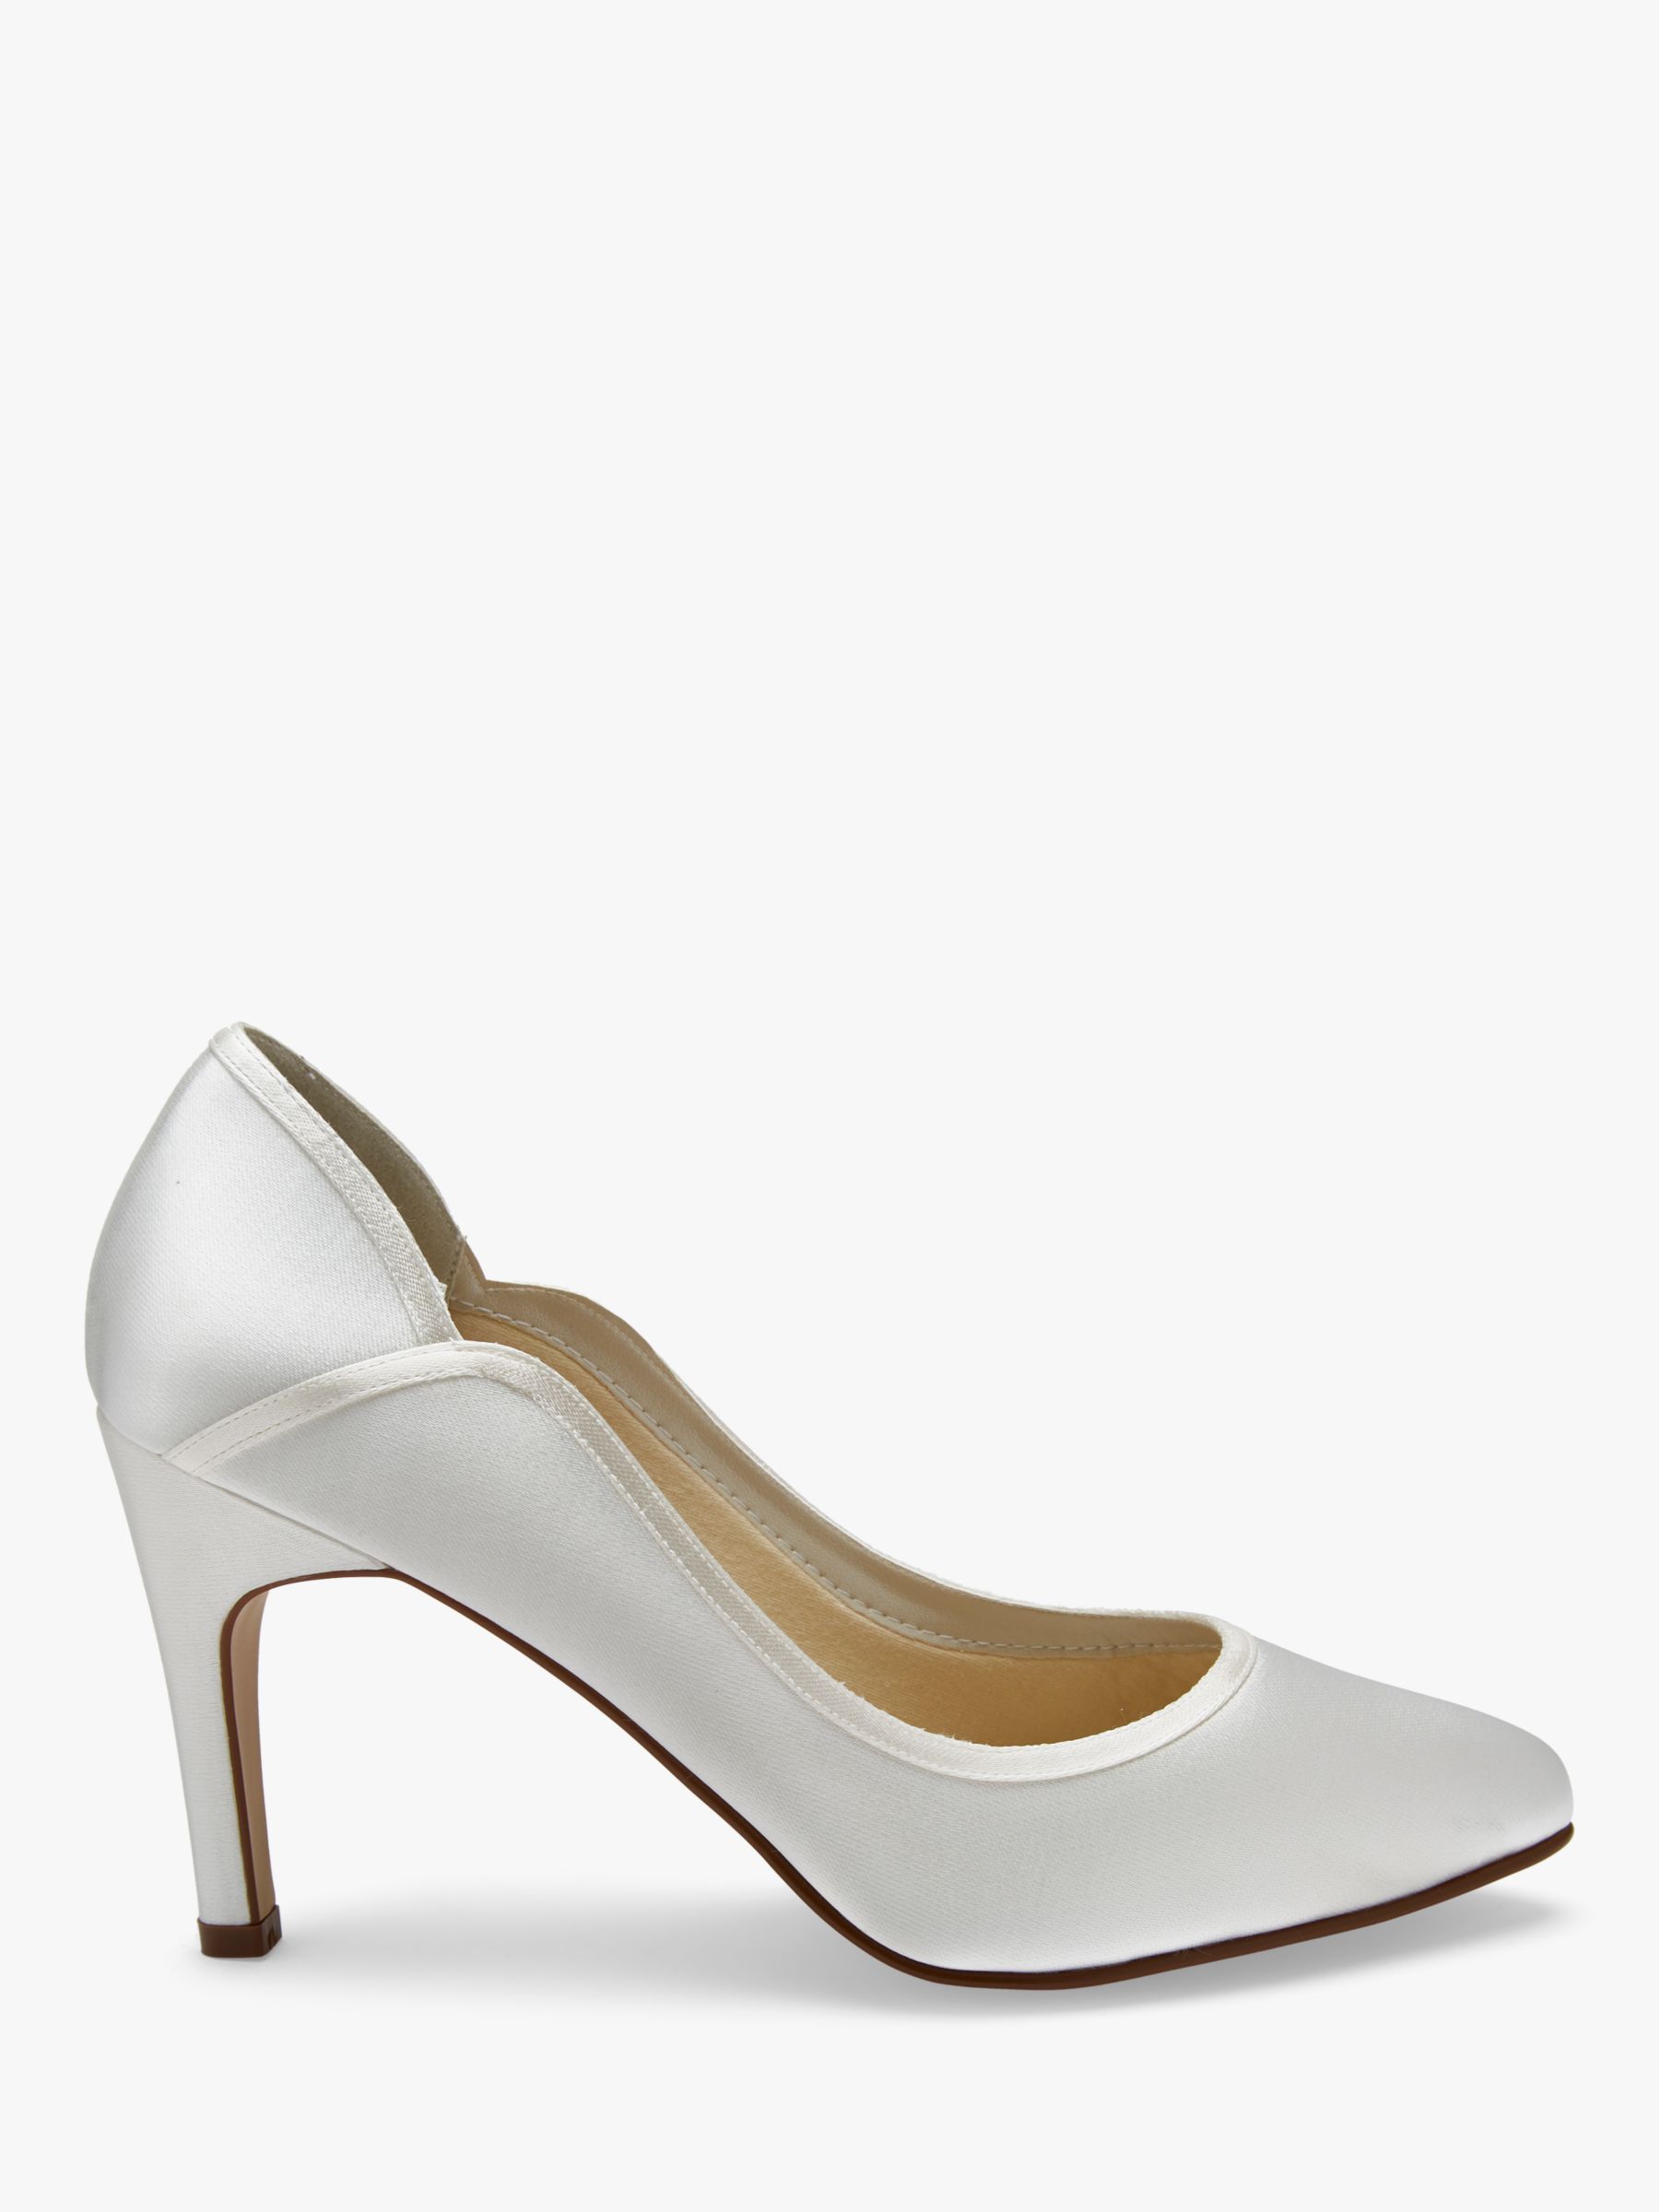 Rainbow Club Lucy Satin Court Shoes, Ivory at John Lewis